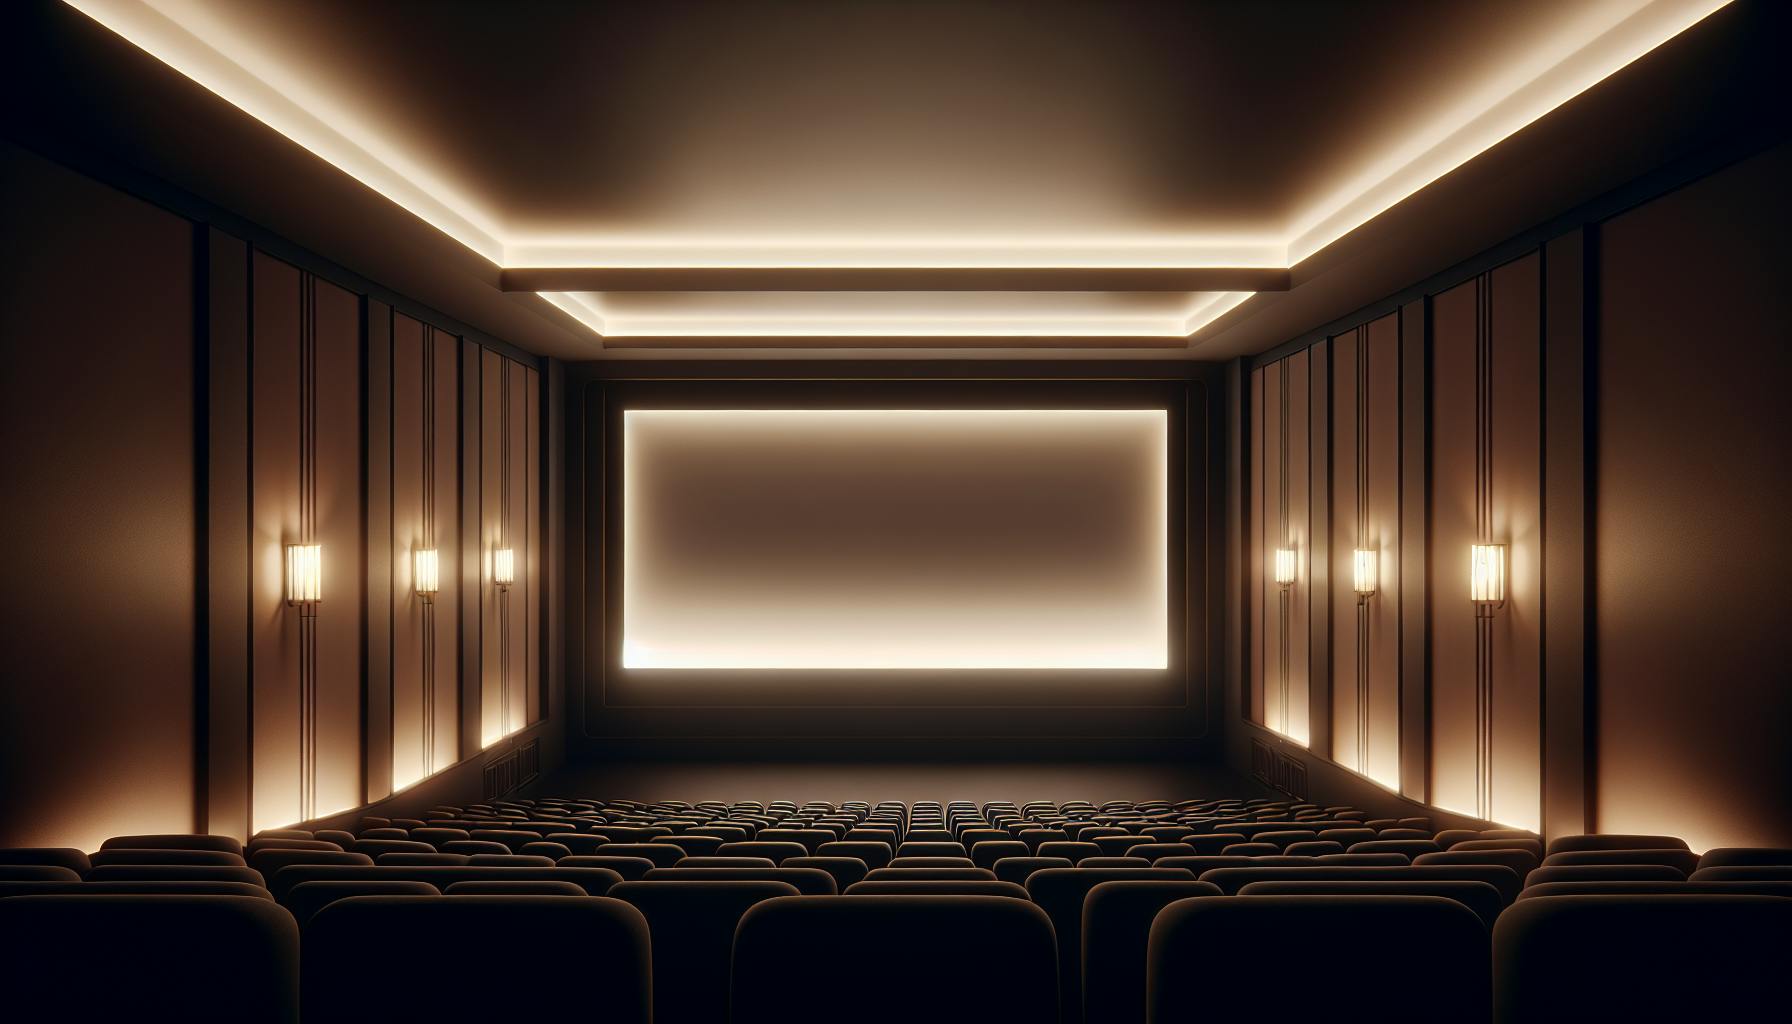 Movie Theater Website Design for Enhanced User Experience